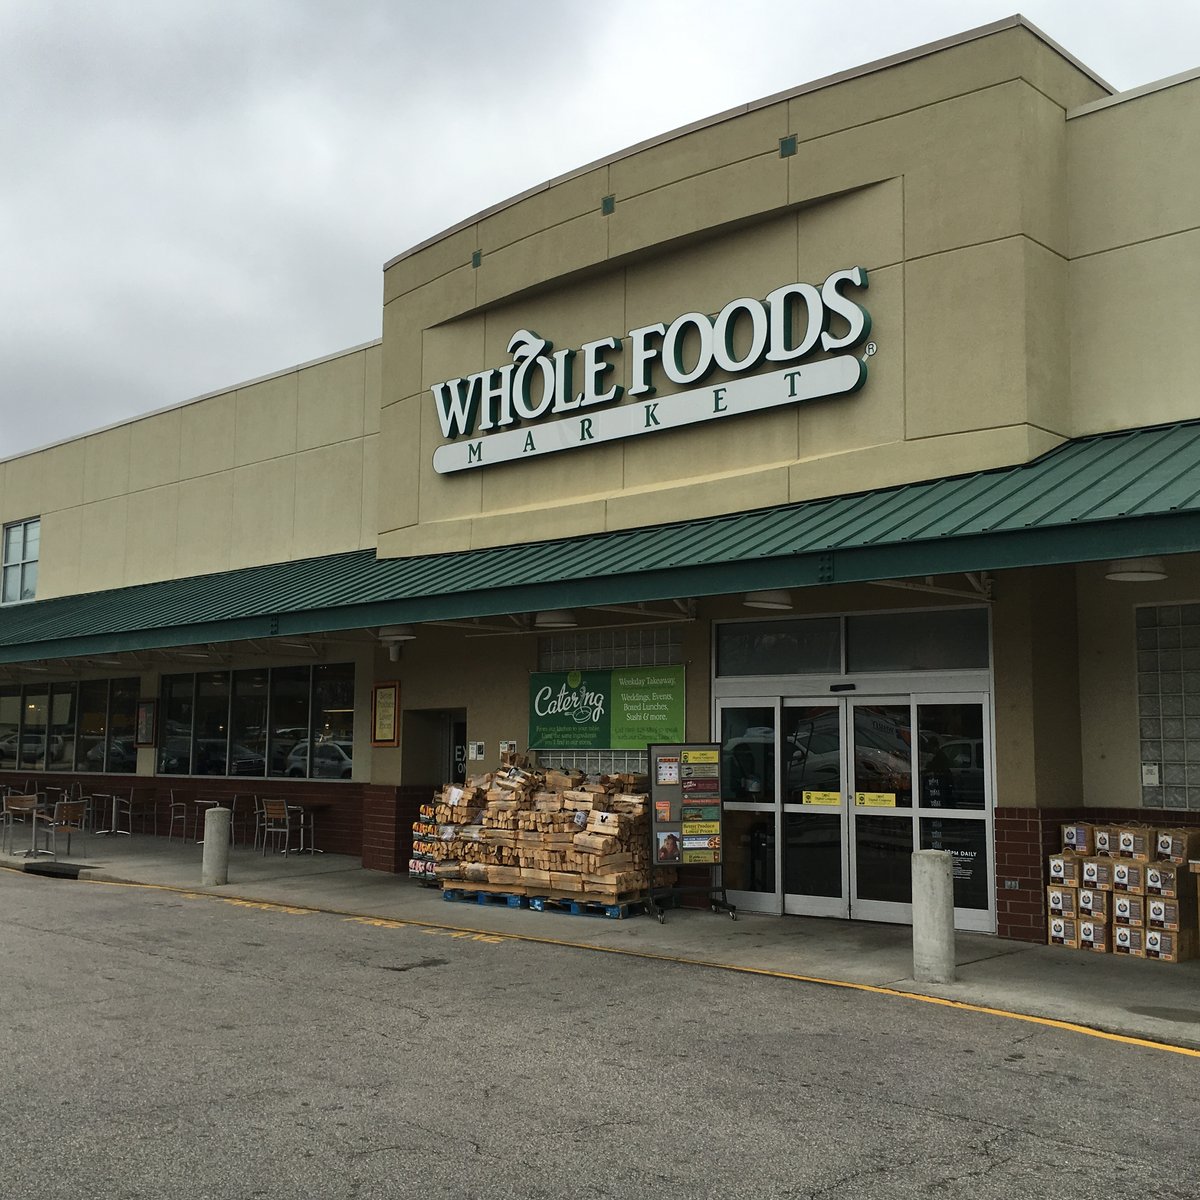 expands Whole Foods free delivery to Atlanta, San Francisco area